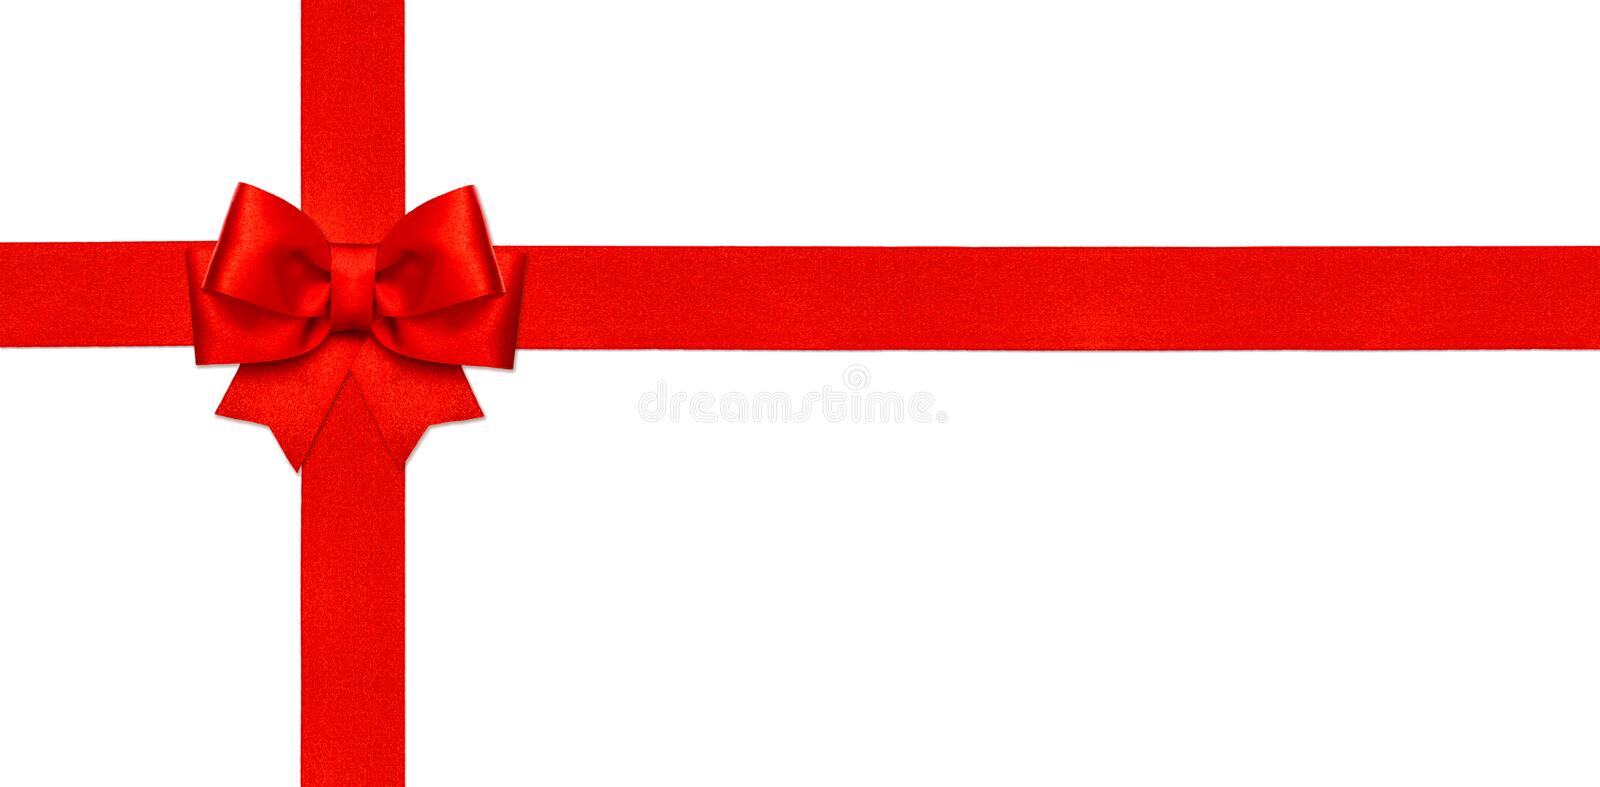 Red Ribbon Images